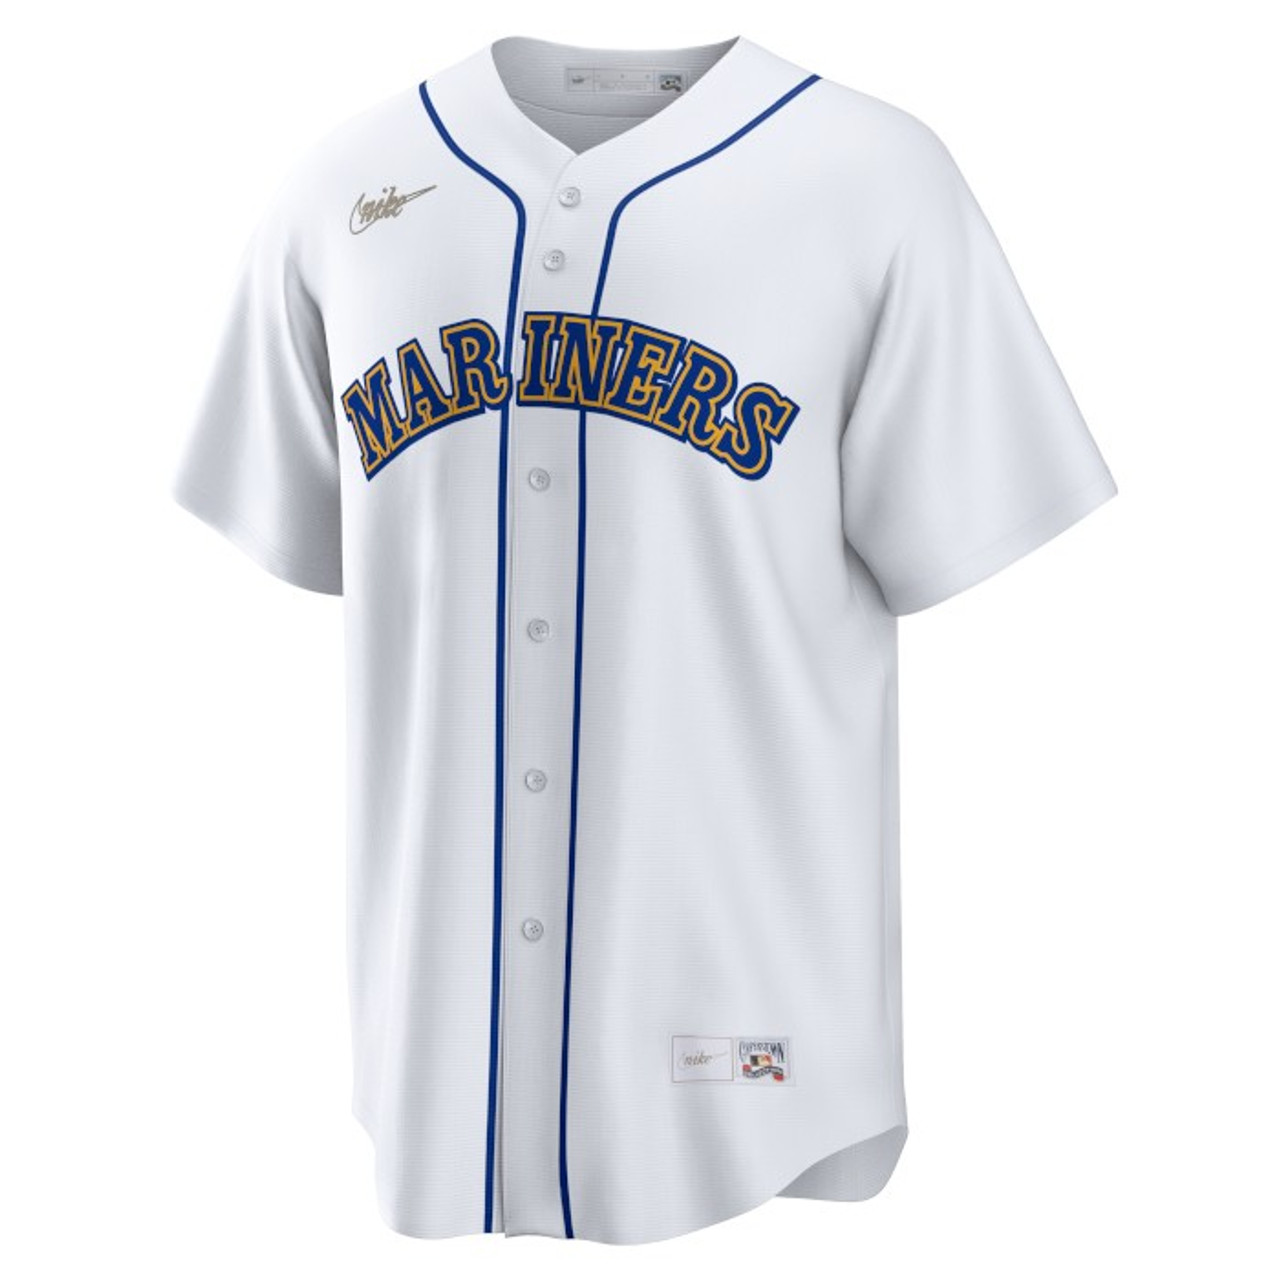 Men's Nike Edgar Martinez Seattle Mariners Cooperstown Collection White  Jersey